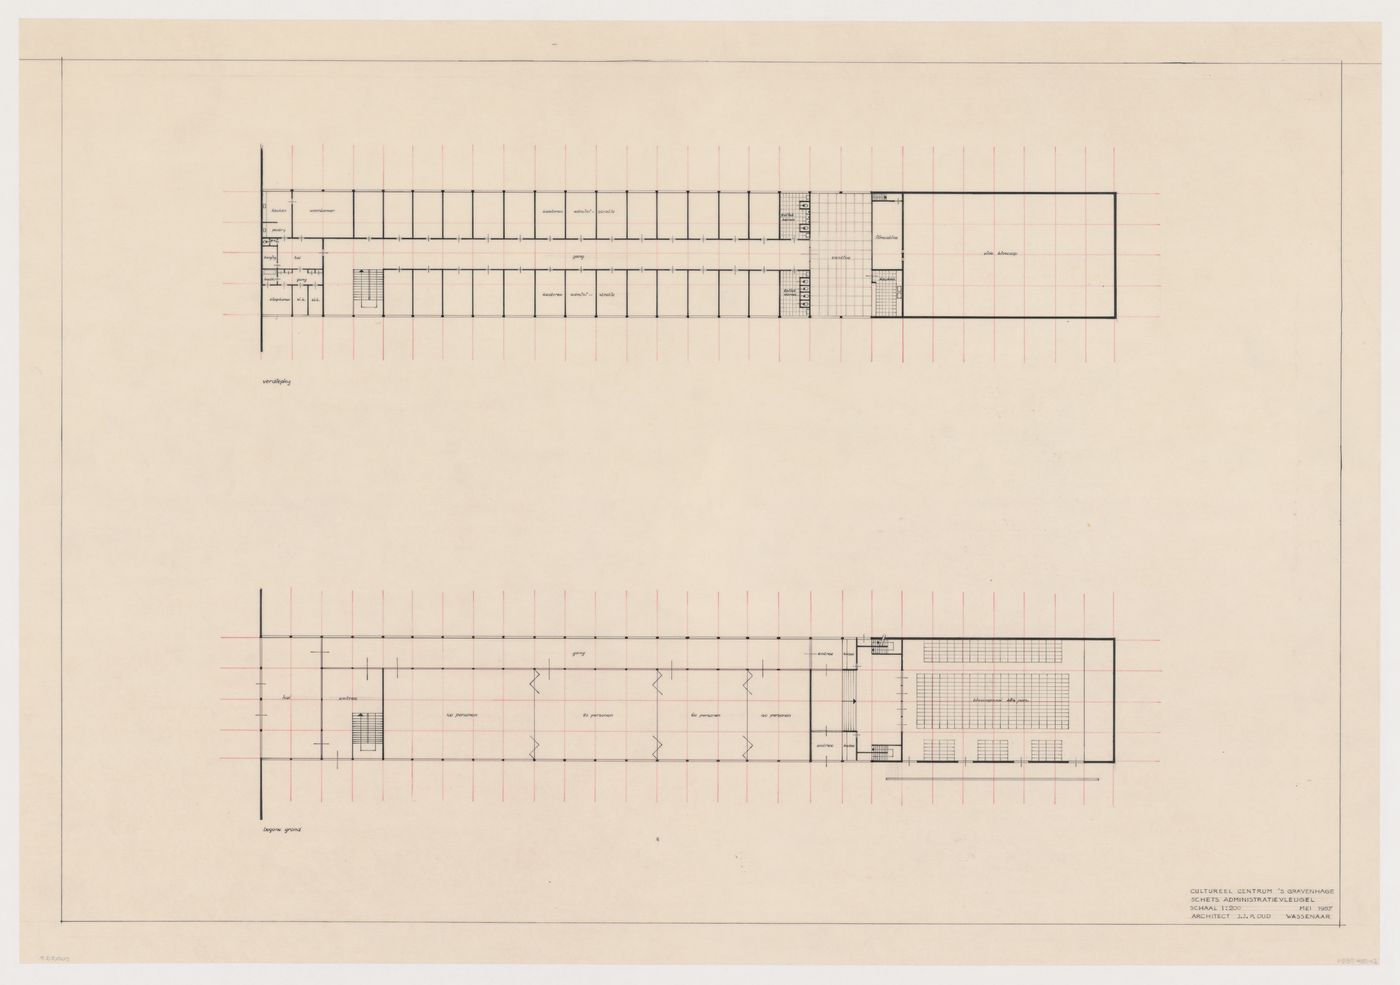 Ground and first floor plans for the cinema and administrative wing for the Congress Hall Complex, The Hague, Netherlands